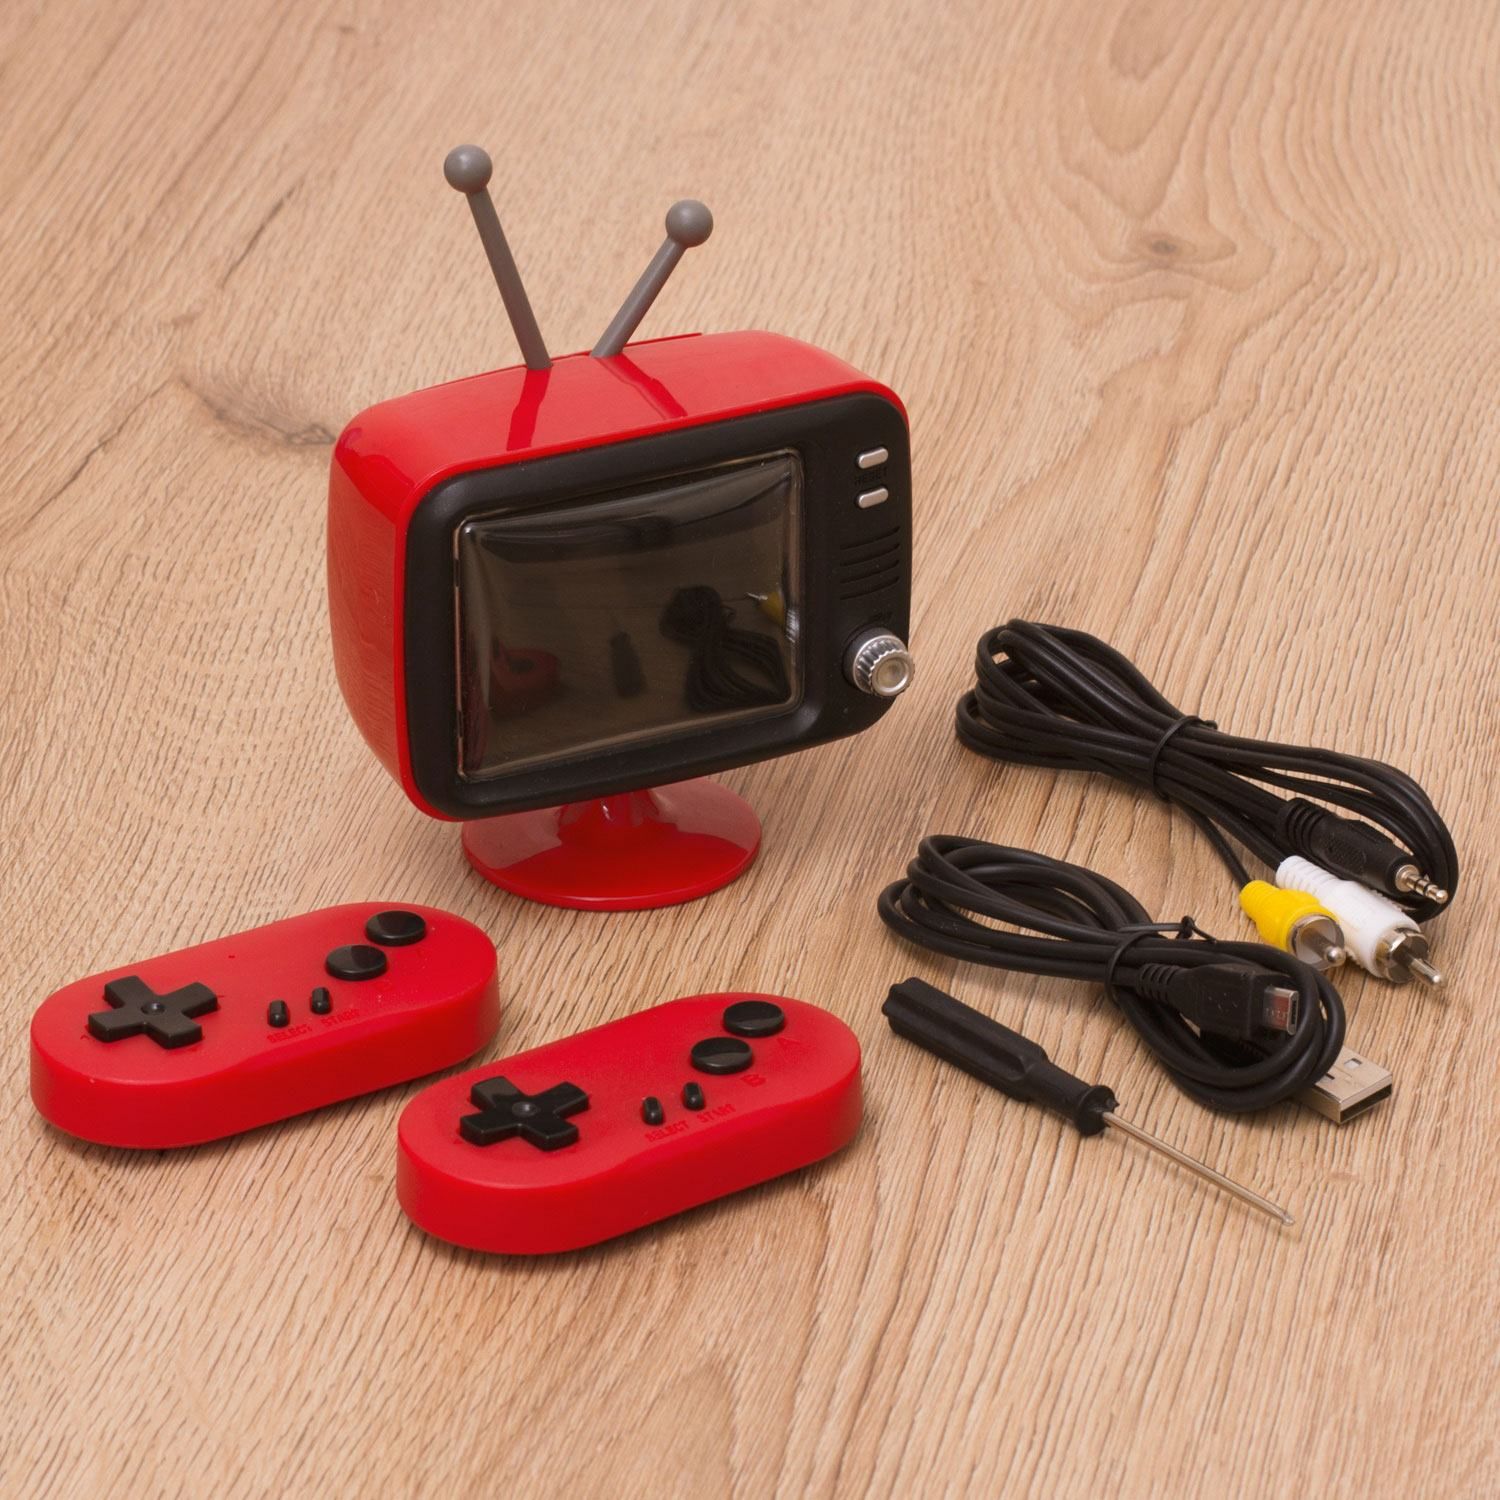 ORB Retro Console Mini TV 300in1 Thumbs Up